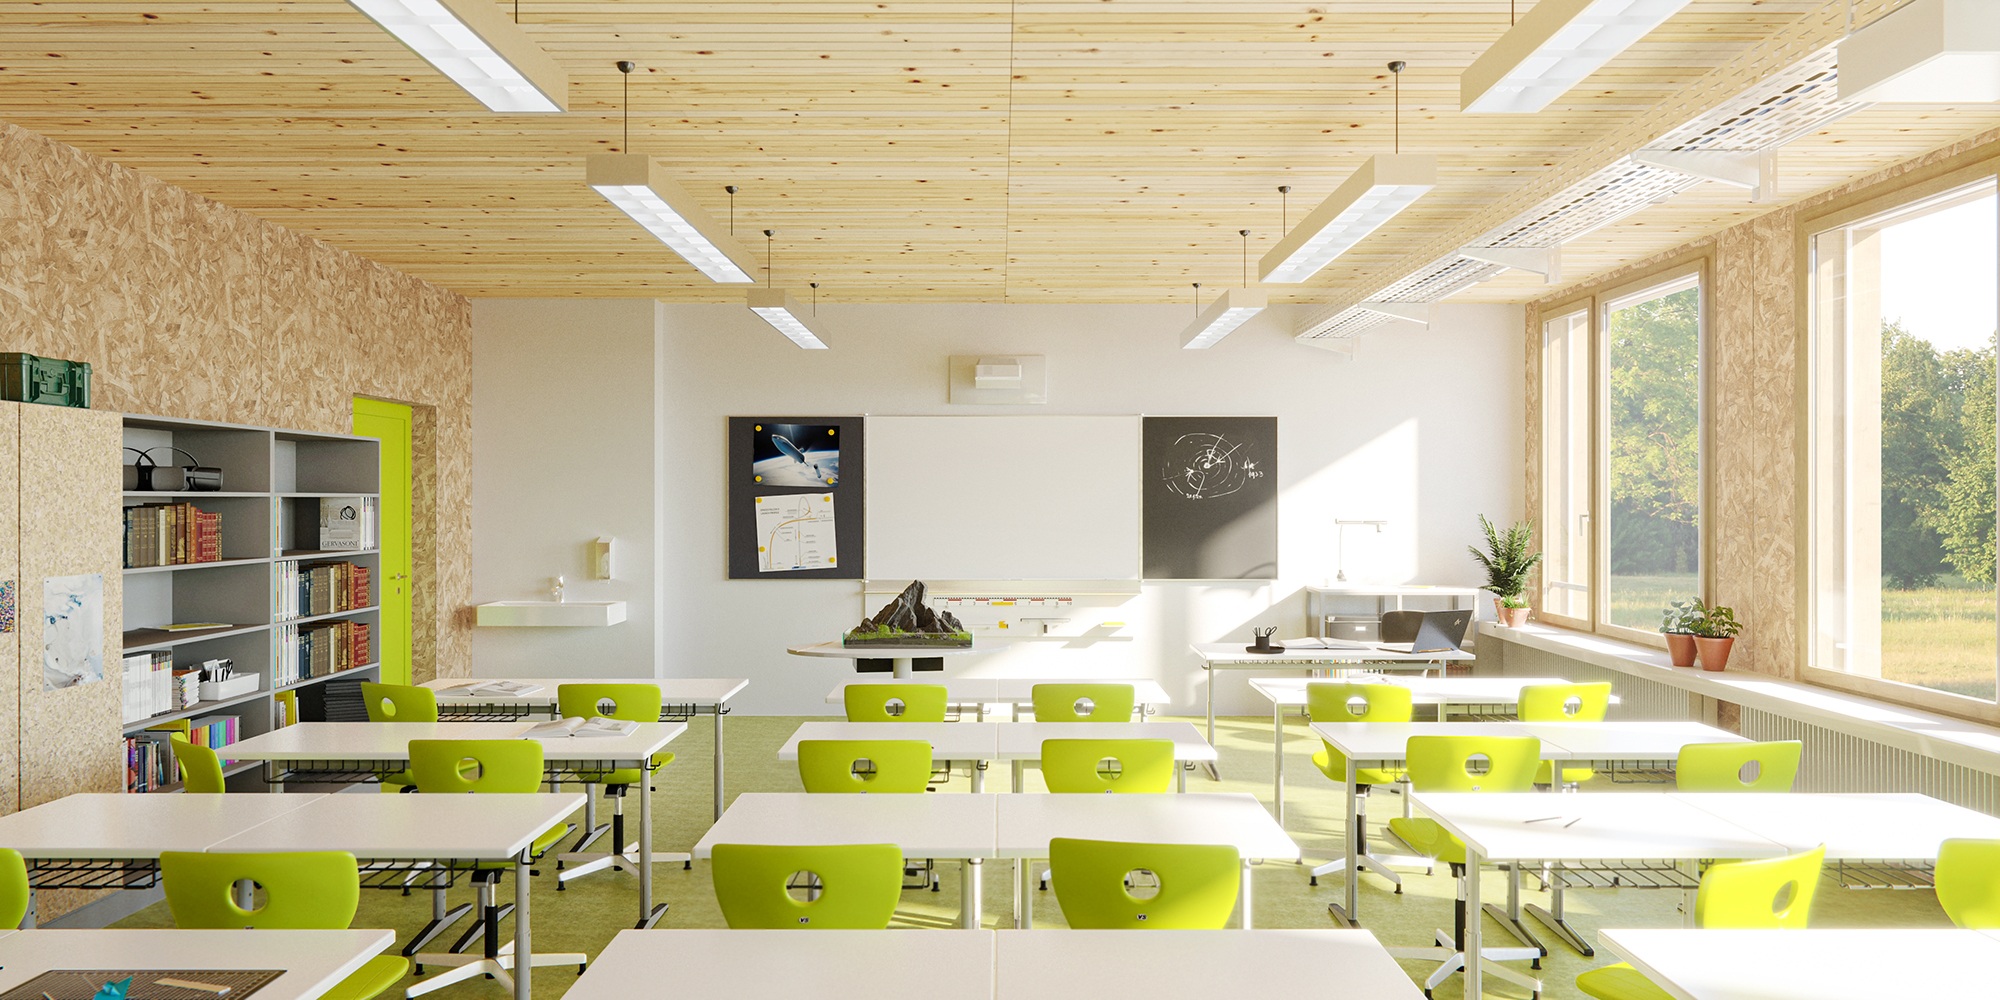 Furnished classroom and interior equipment for school in modular timber design